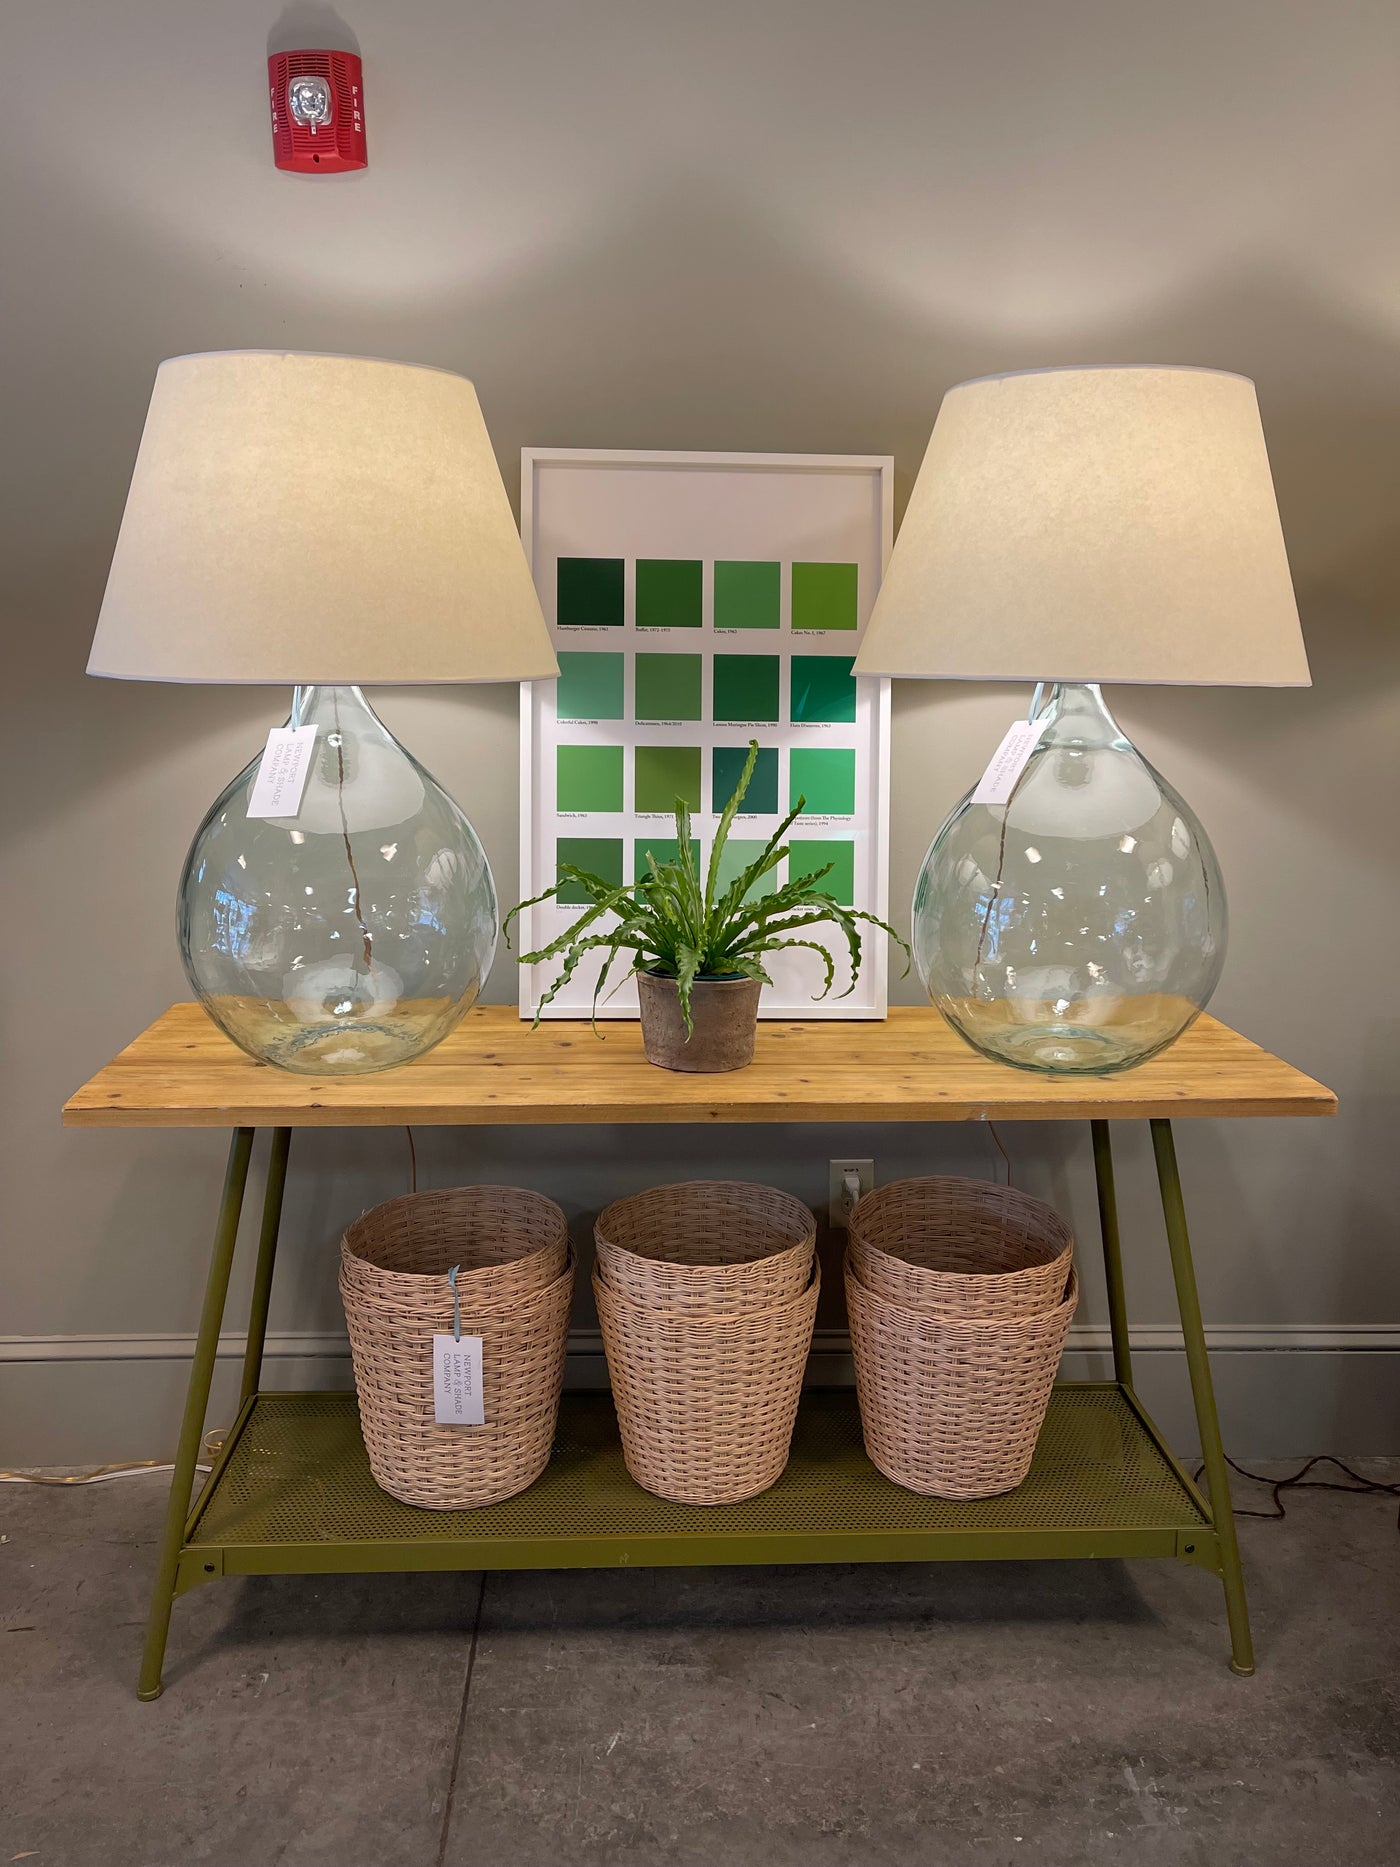 A Pair of Large Colorless Glass Bottles, Now Mounted as Lamps  | Newport Lamp And Shade | Located in Newport, RI